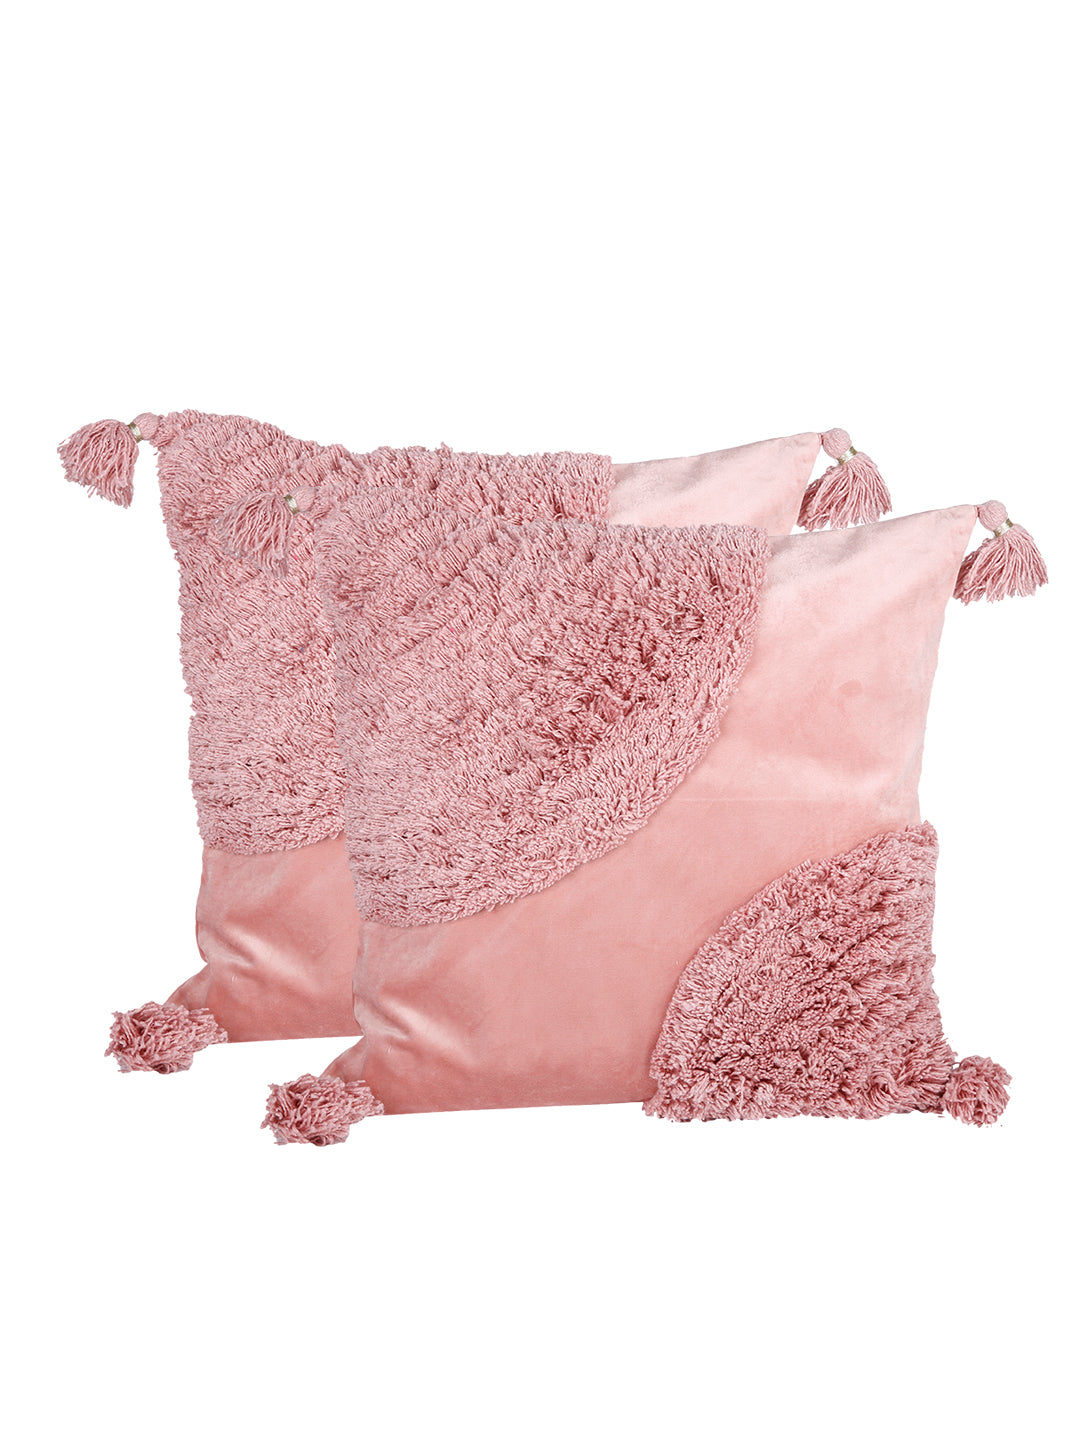 Set of 2 Peach-Coloured Textured Square Velvet Sustainable Cushion Covers